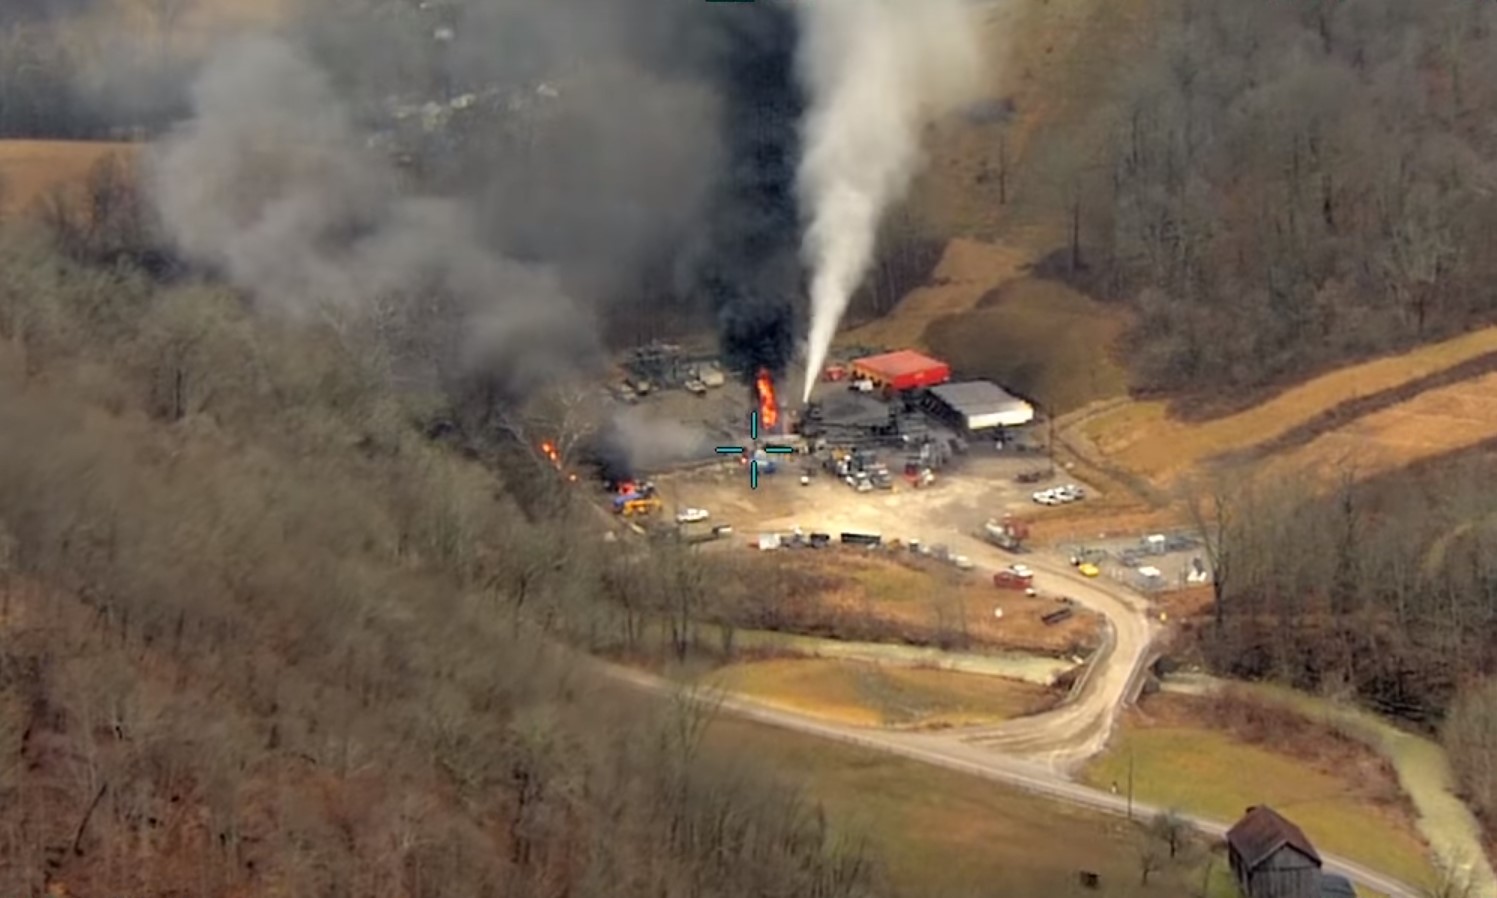 Ohio gas well blowout leaked more than many countries do in a year